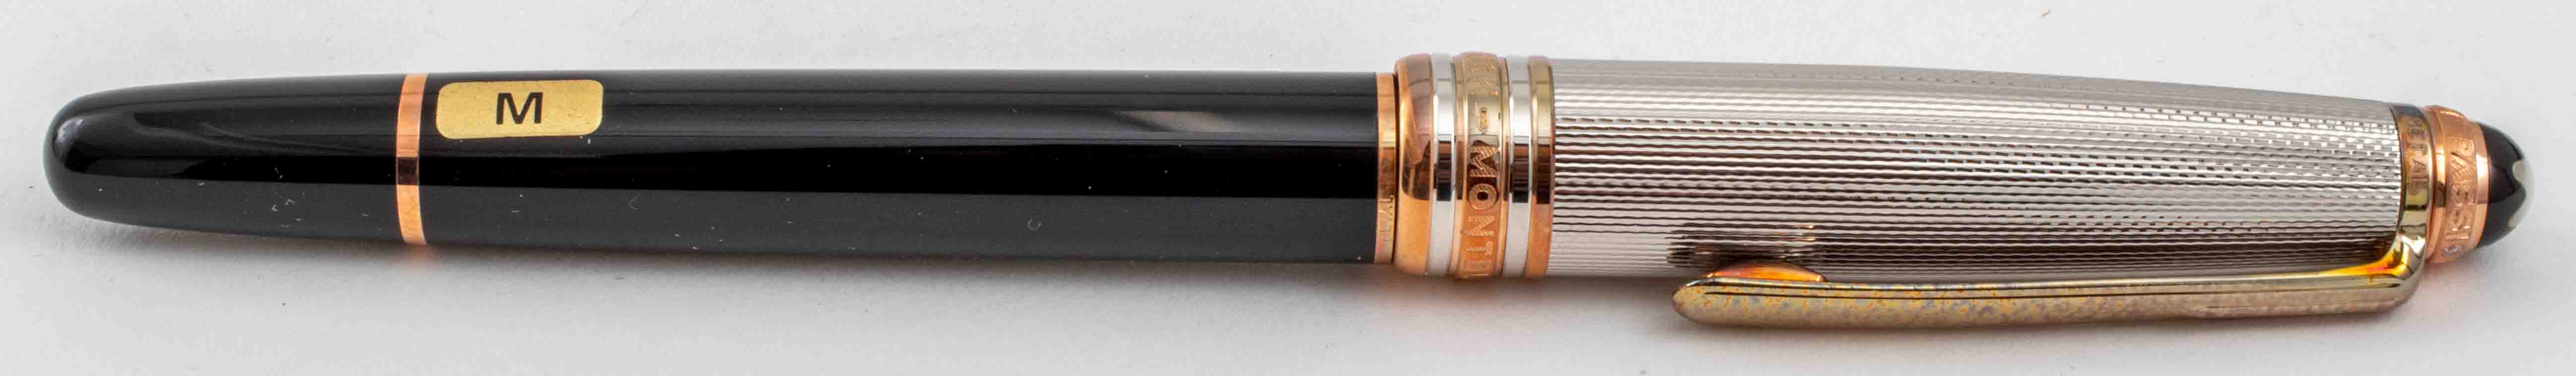 MONTBLANC MEISTERSTUCK 1924 EDITION 2be3f3